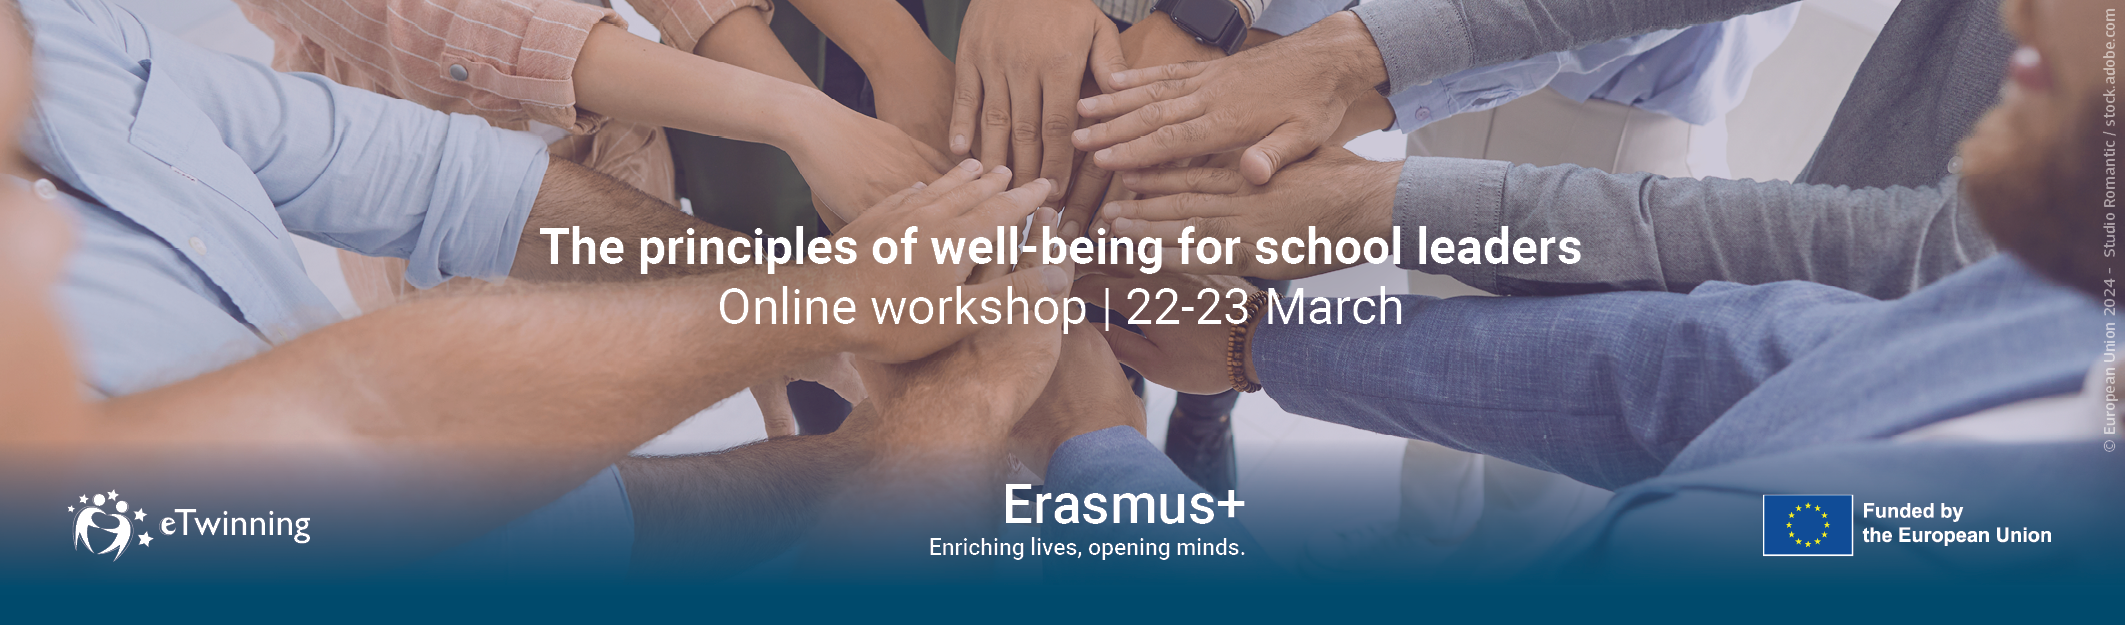 Online Workshop on the Principles of Well-being for School Leaders